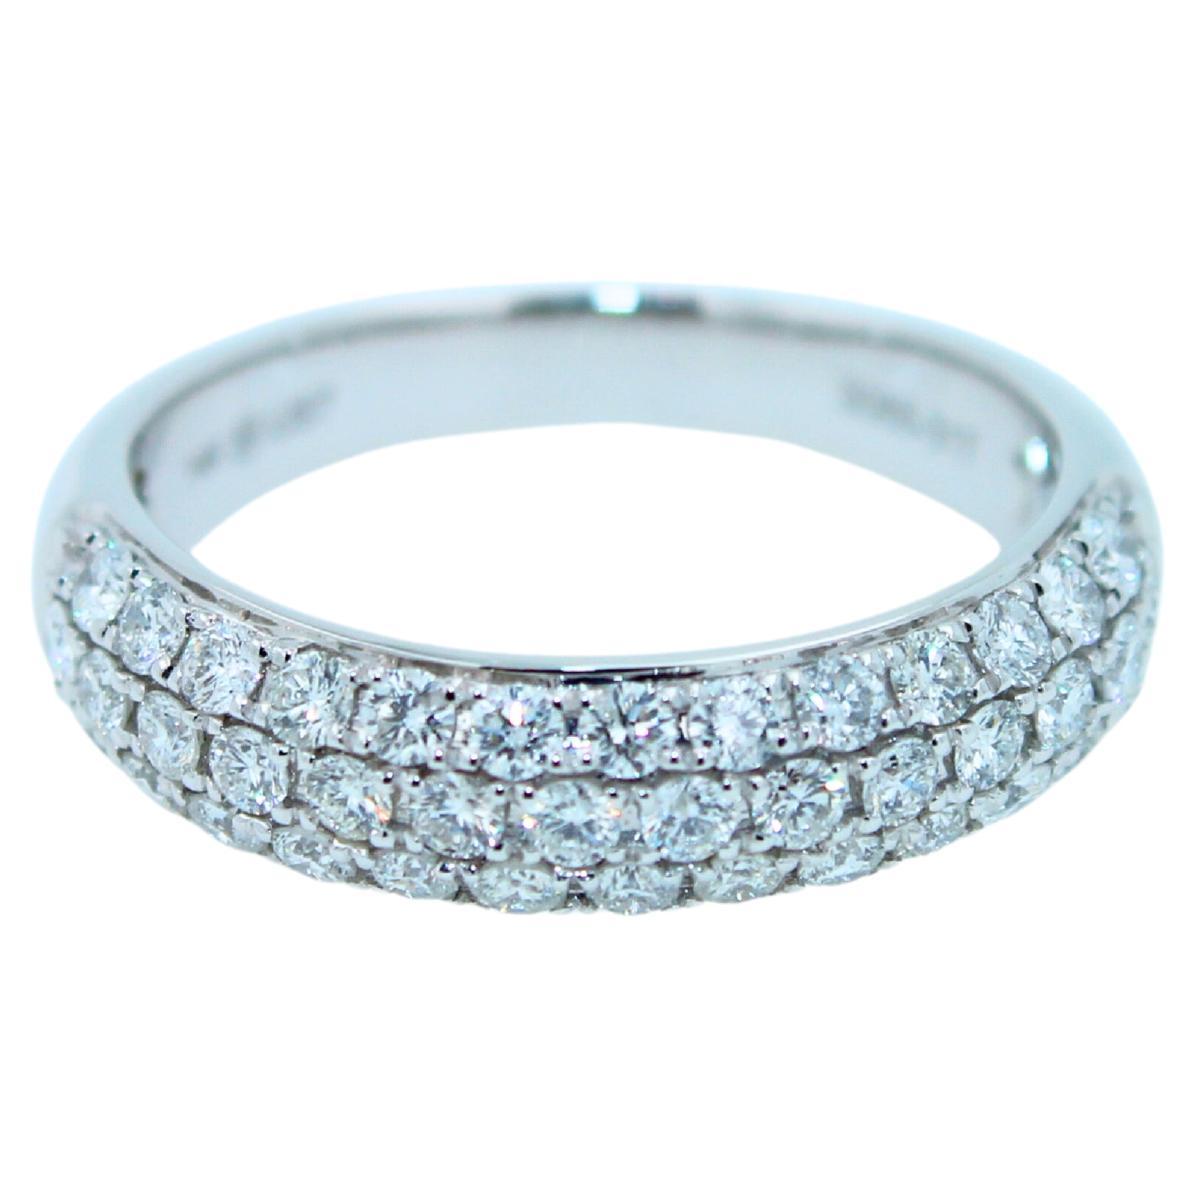 1 Carats Diamond Halo Pave Medium Stackable Wedding Dainty Band White Gold Ring